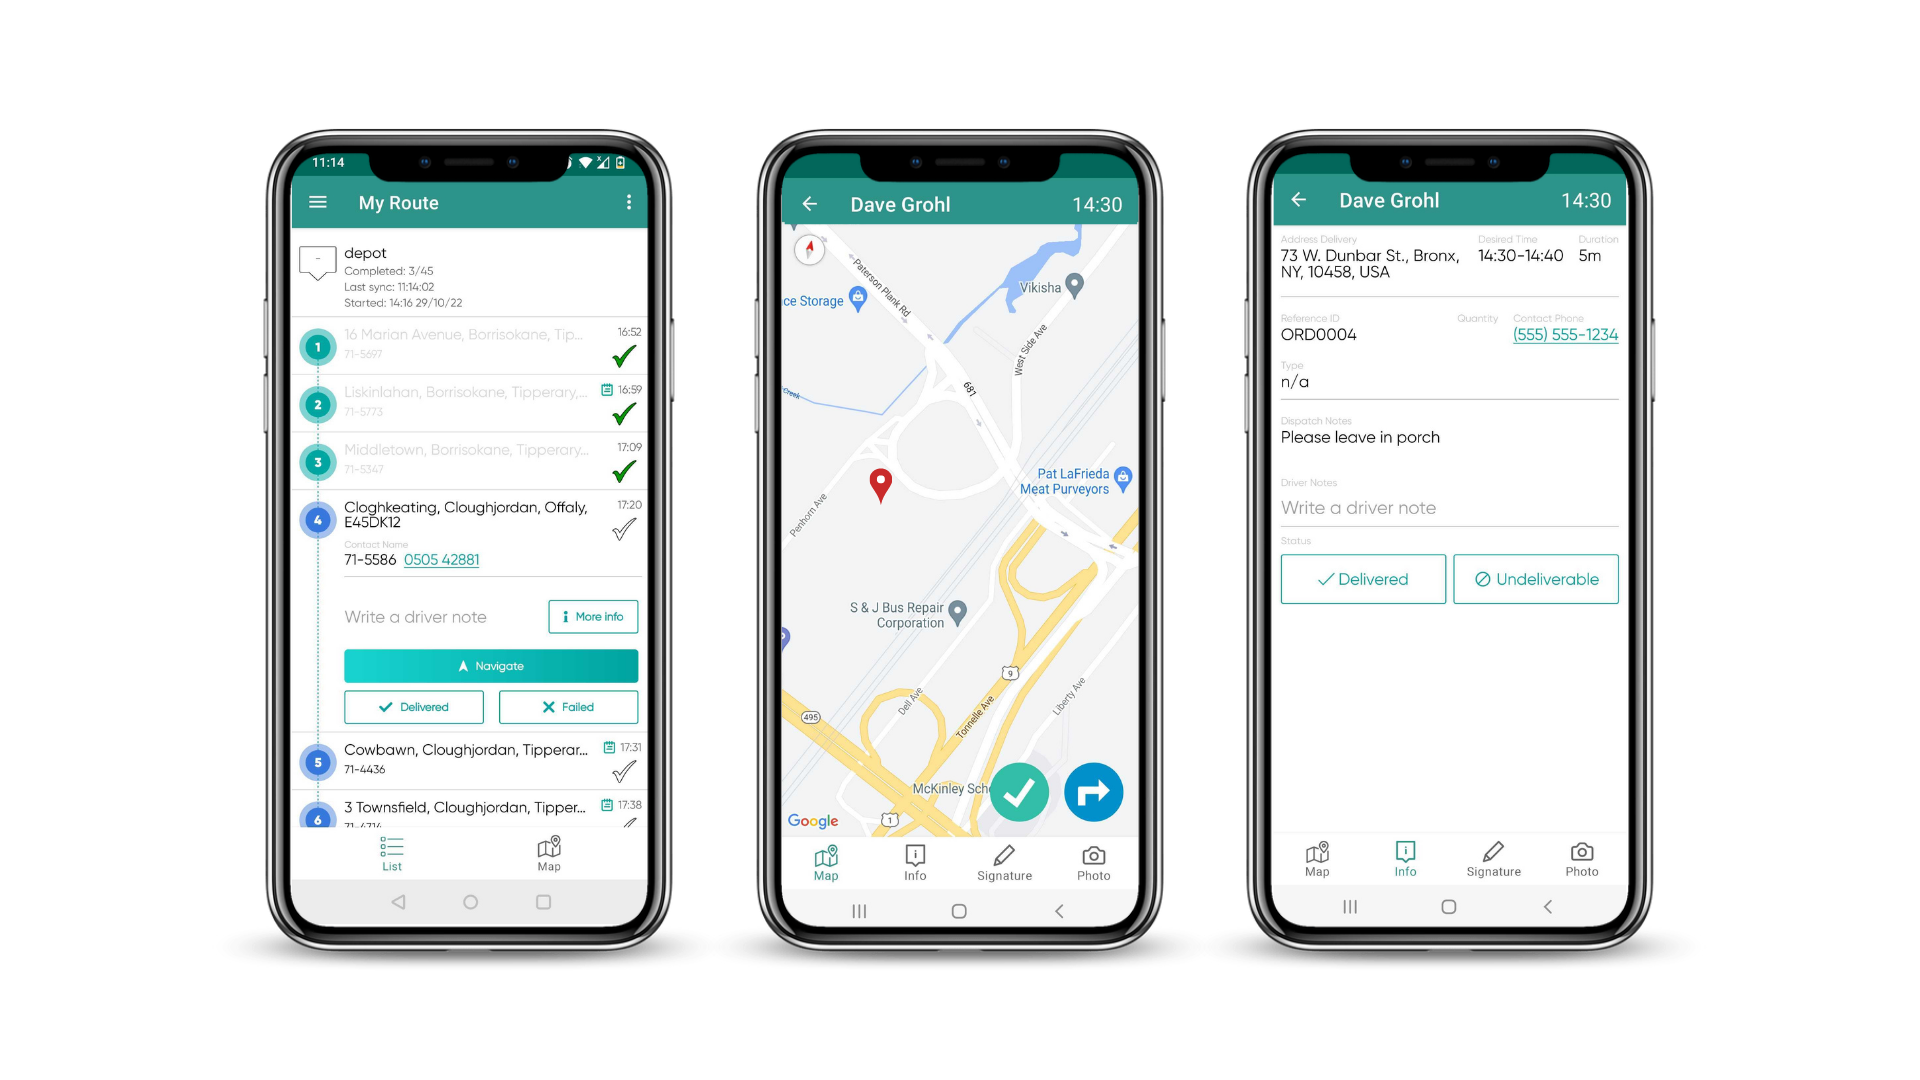 Delivery Driver App